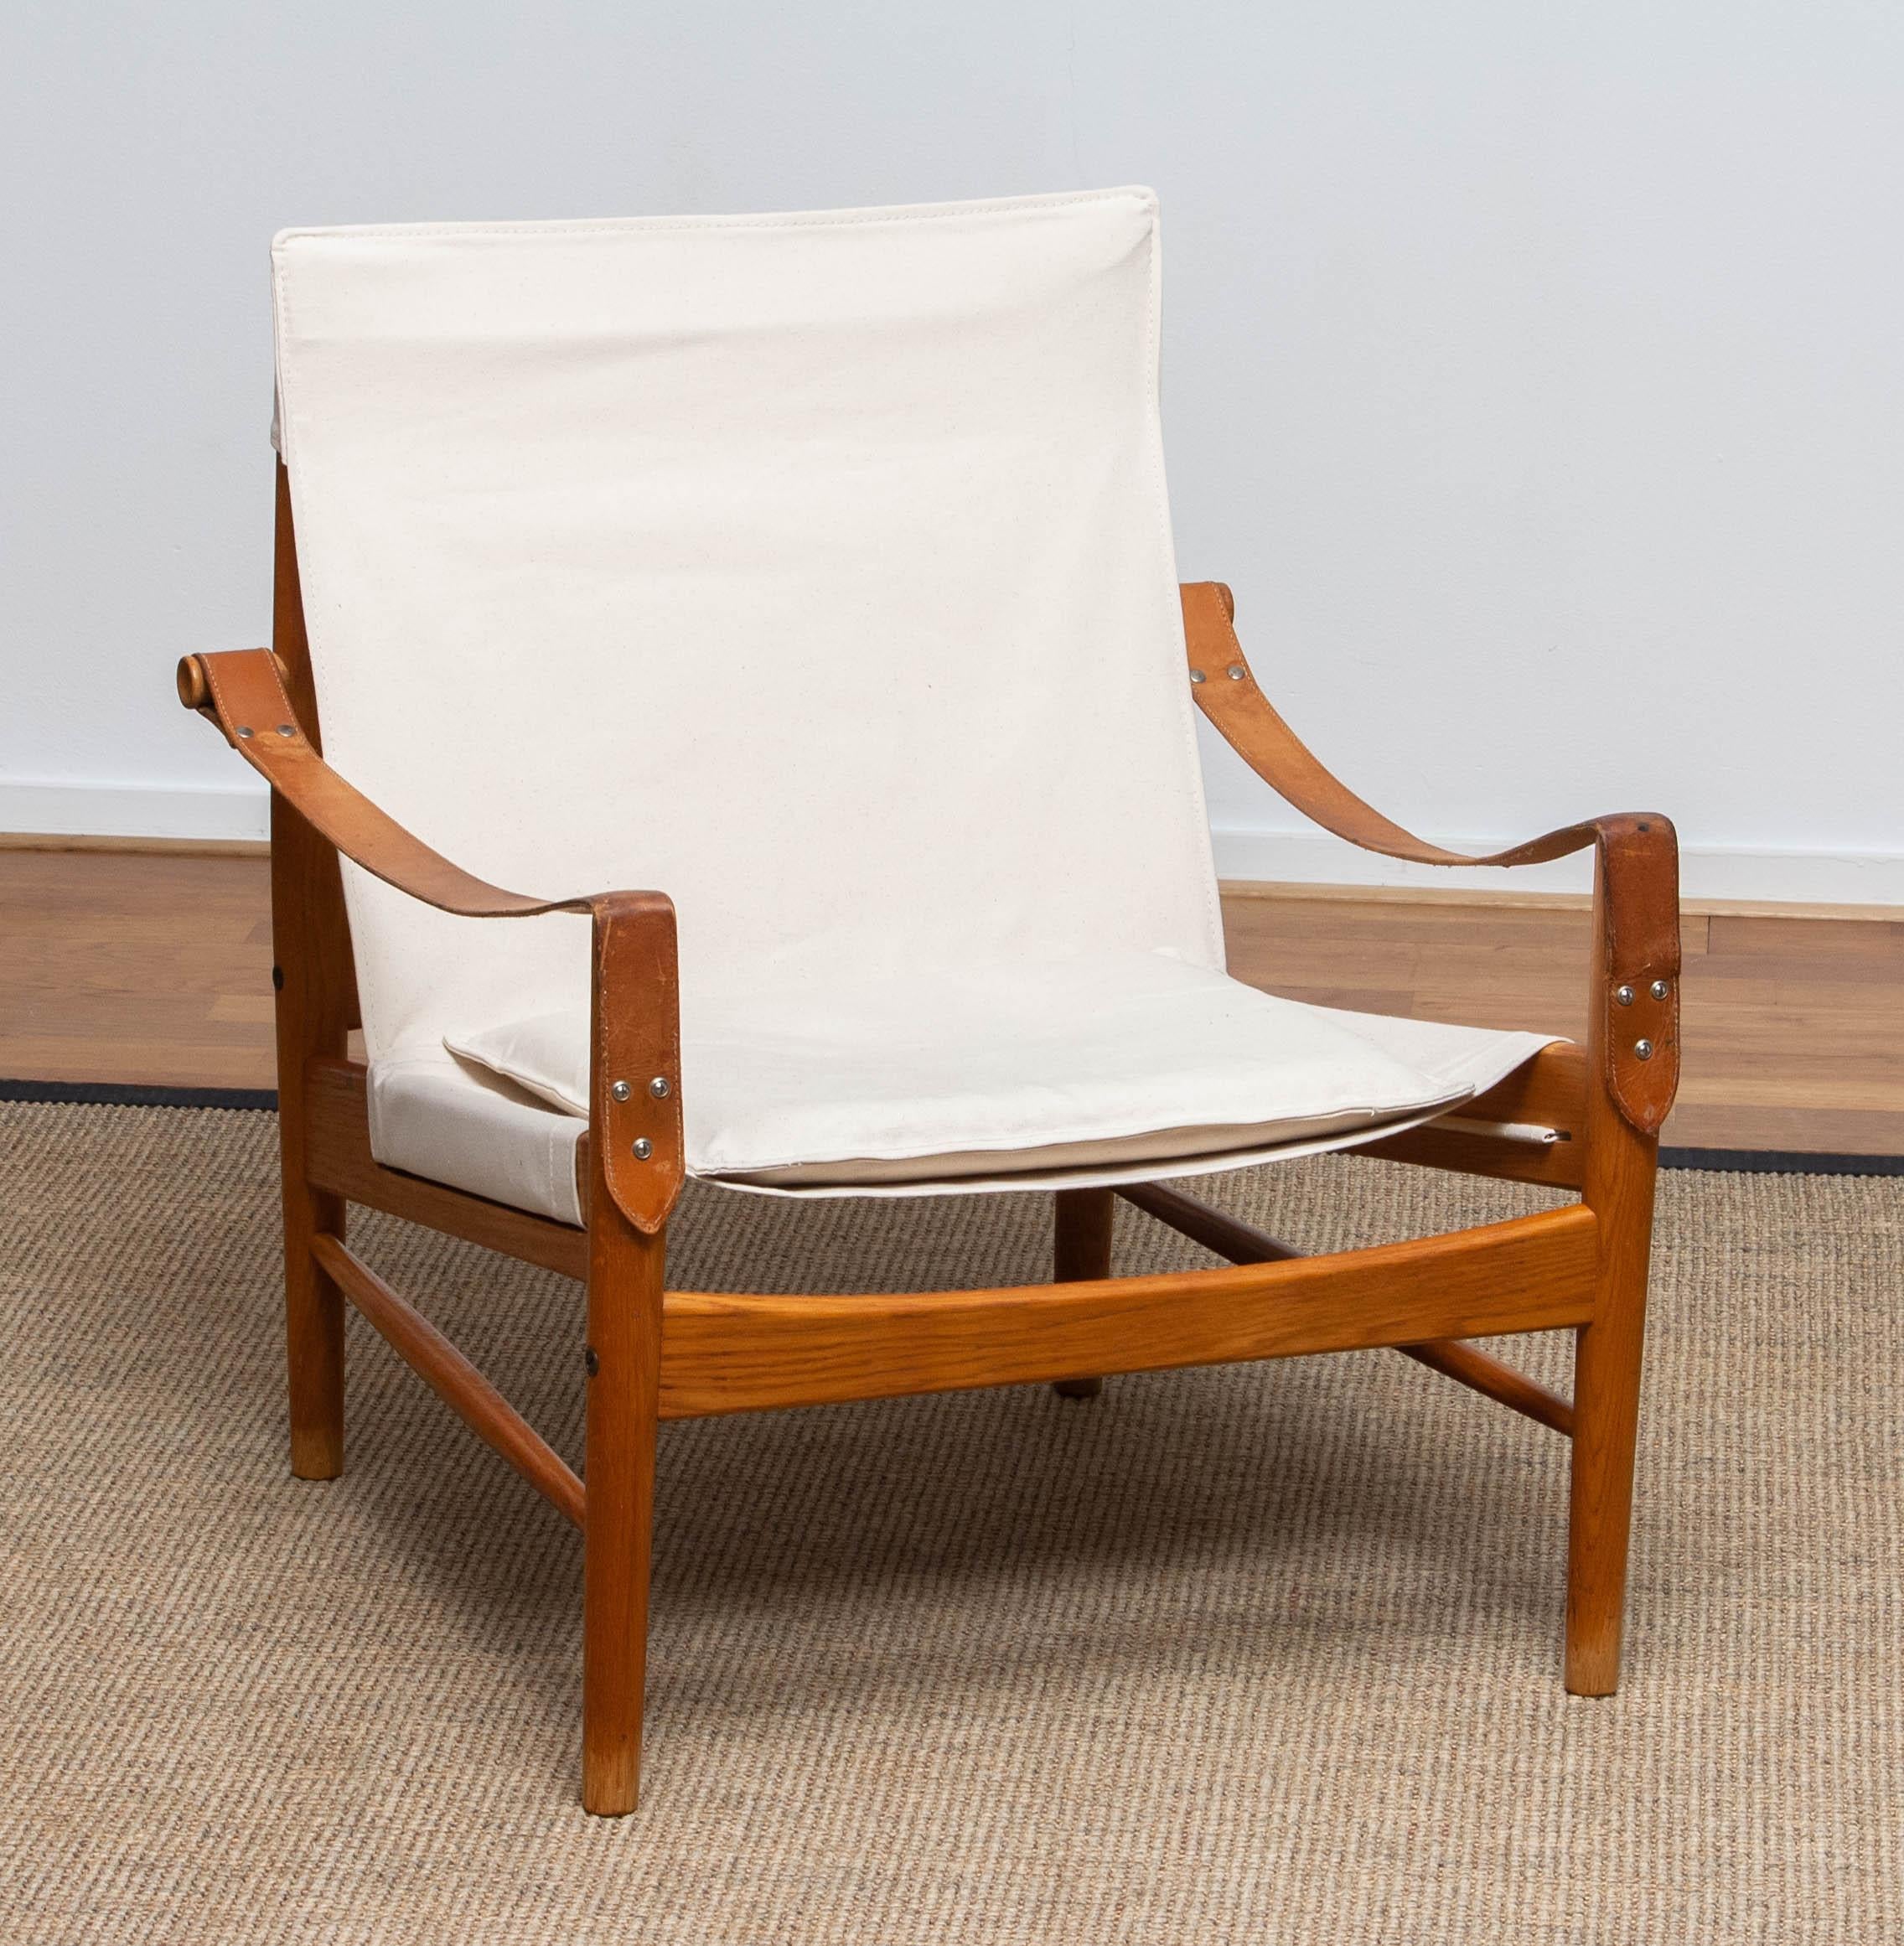 Beautiful safari chair designed by Hans Olsen for Viska Möbler in Kinna, Sweden.
This chairs are made of oak with a new canvas upholstery.
It is in a wonderful condition and marked.
Period: 1960s.
Dimensions: H 81 cm, W 73 cm, D 70 cm, SH 38